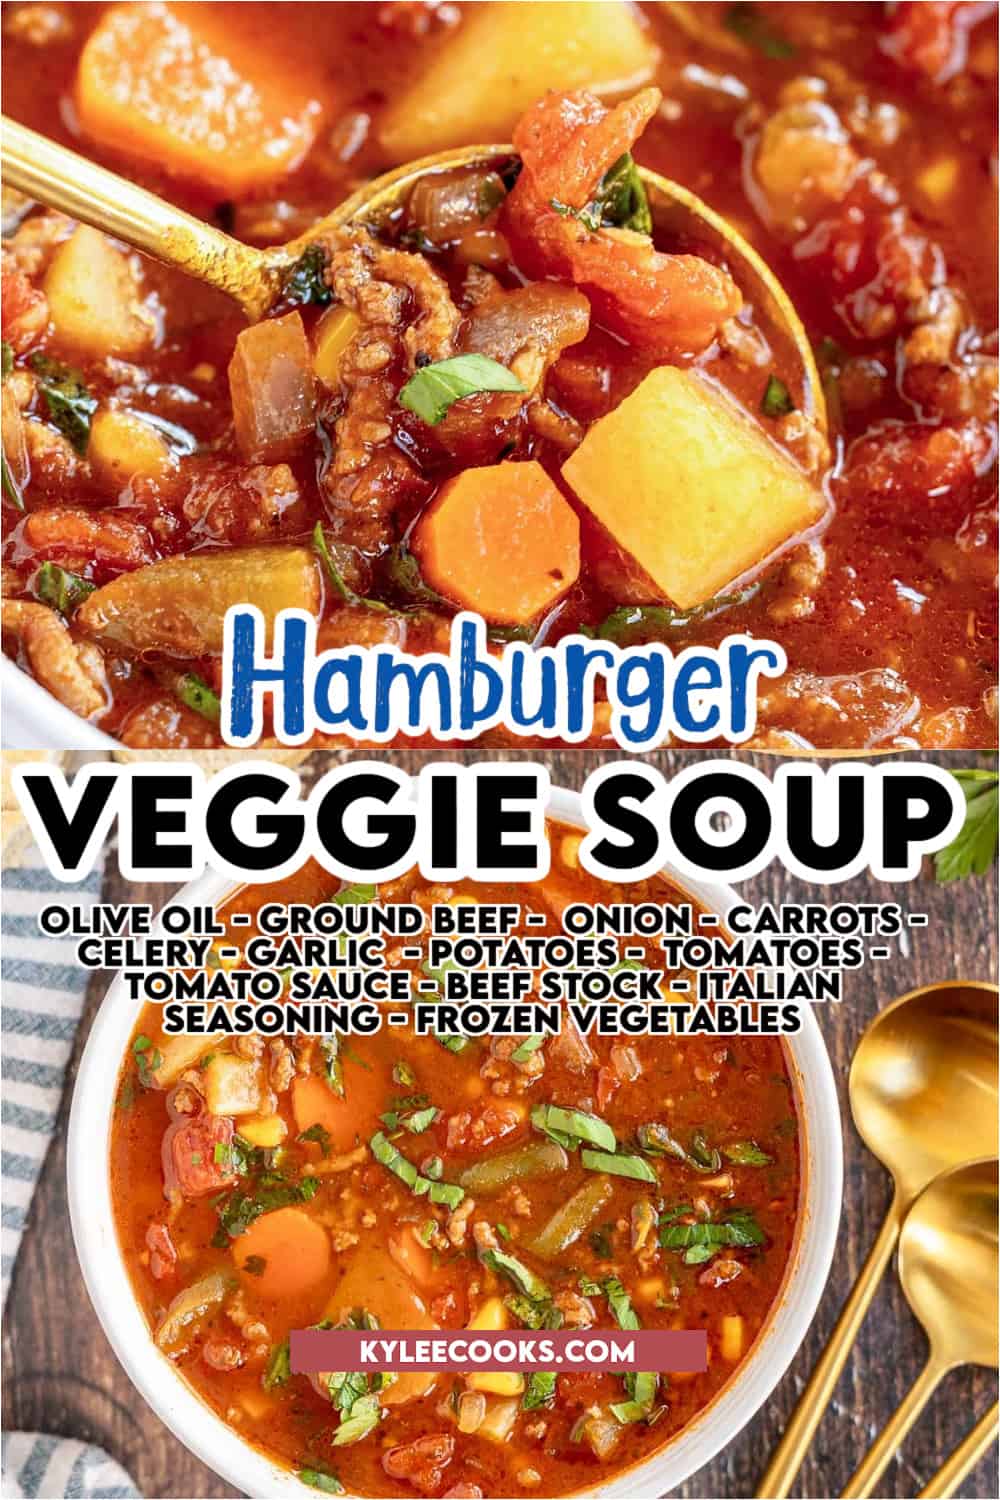 Two bowls of hamburger vegetable soup with recipe name and ingredients overlaid in text.